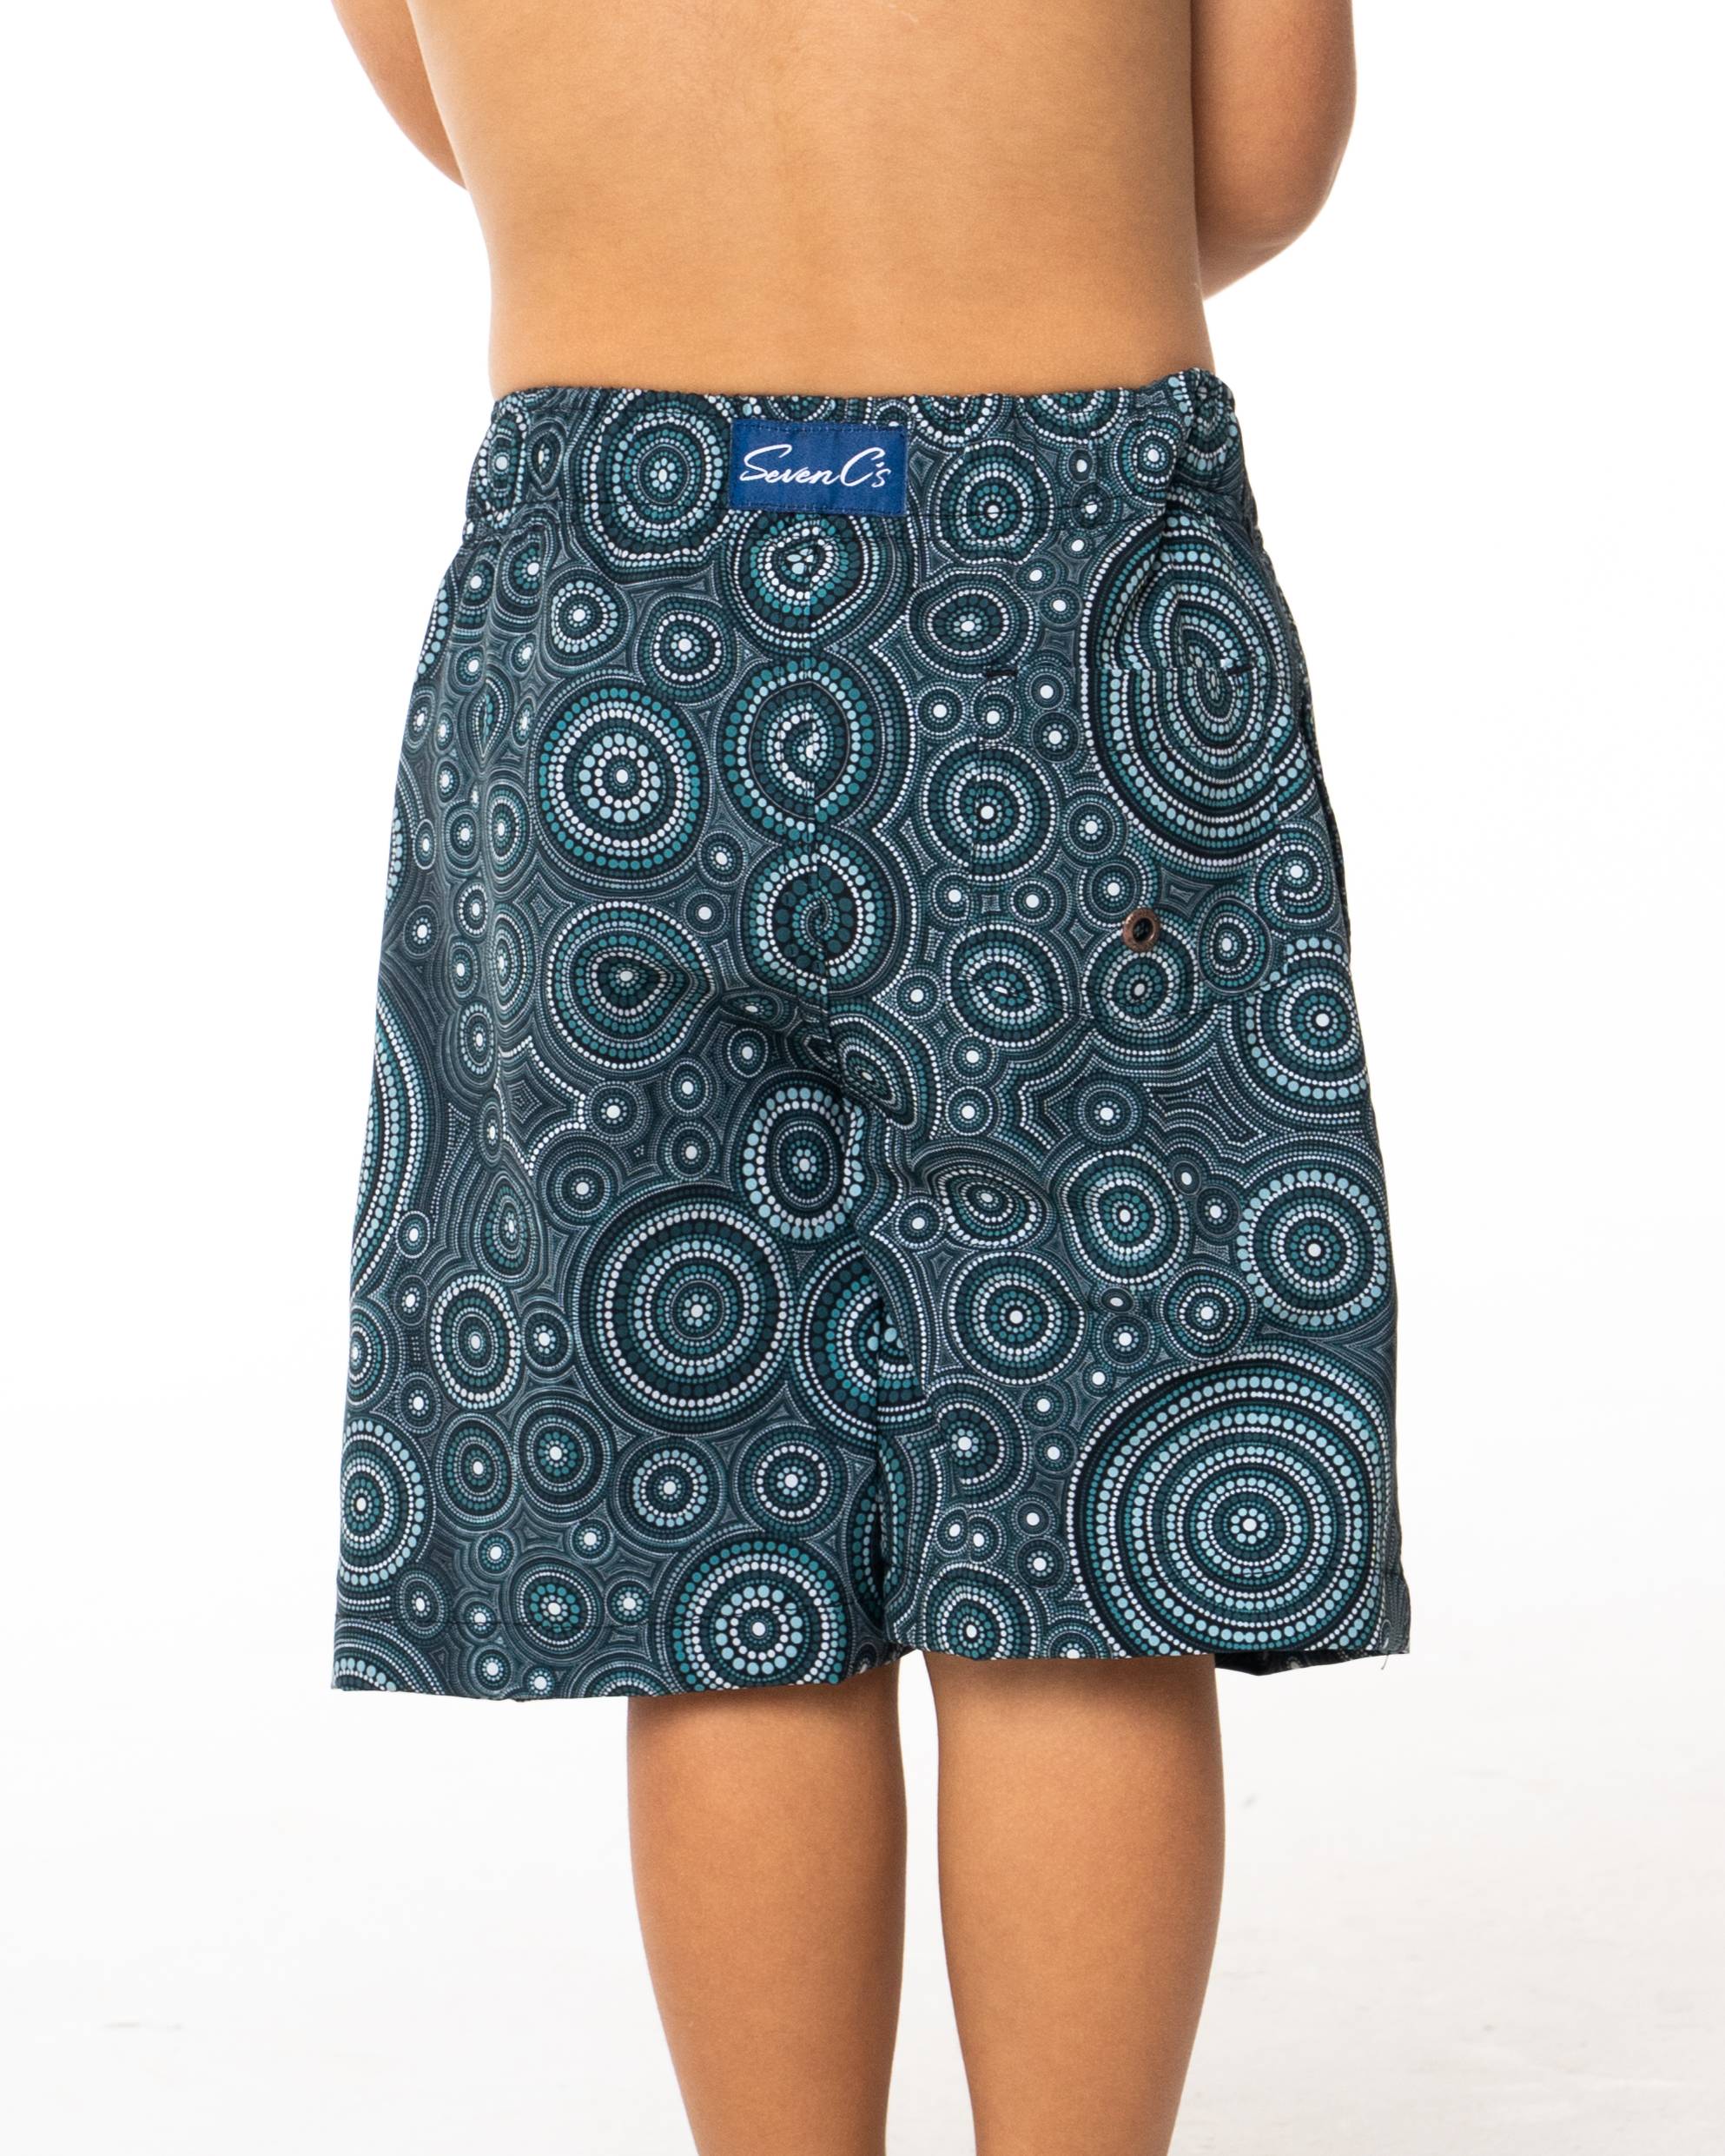 SevenC's Kids' Recycled Polyester Shorts in Dreaming Print - Back View